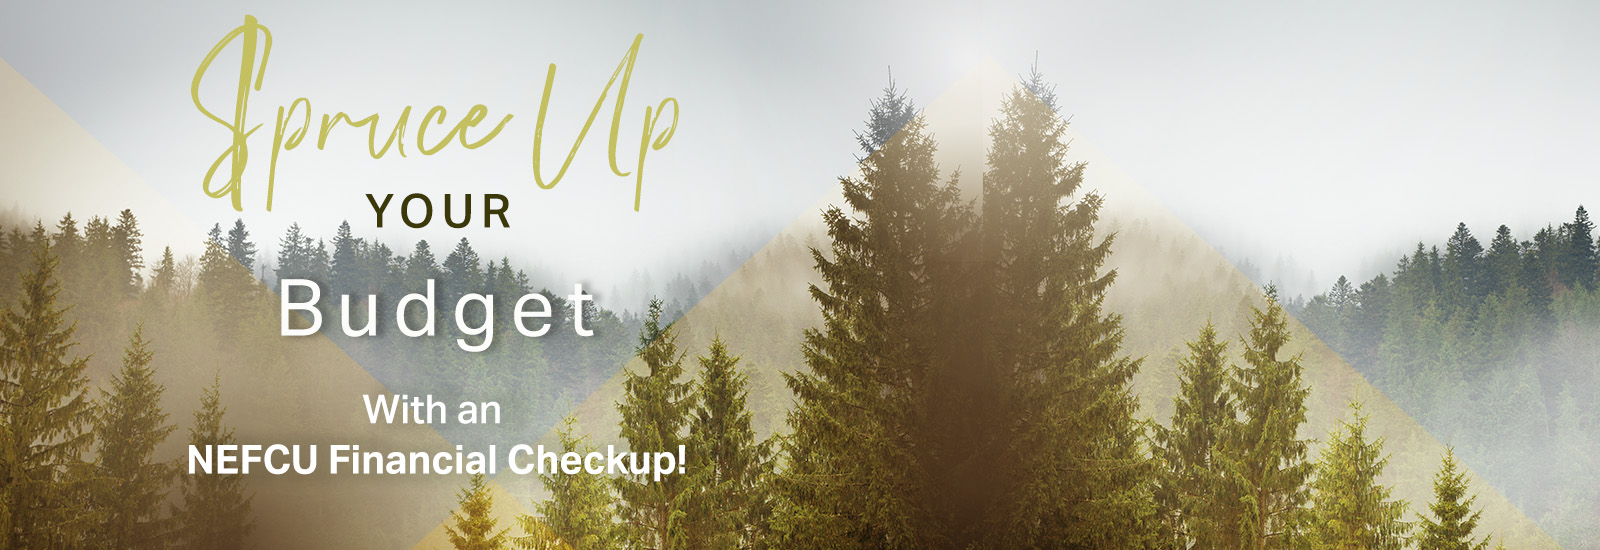 Spruce Up your Budget with an NEFCU Financial Checkup